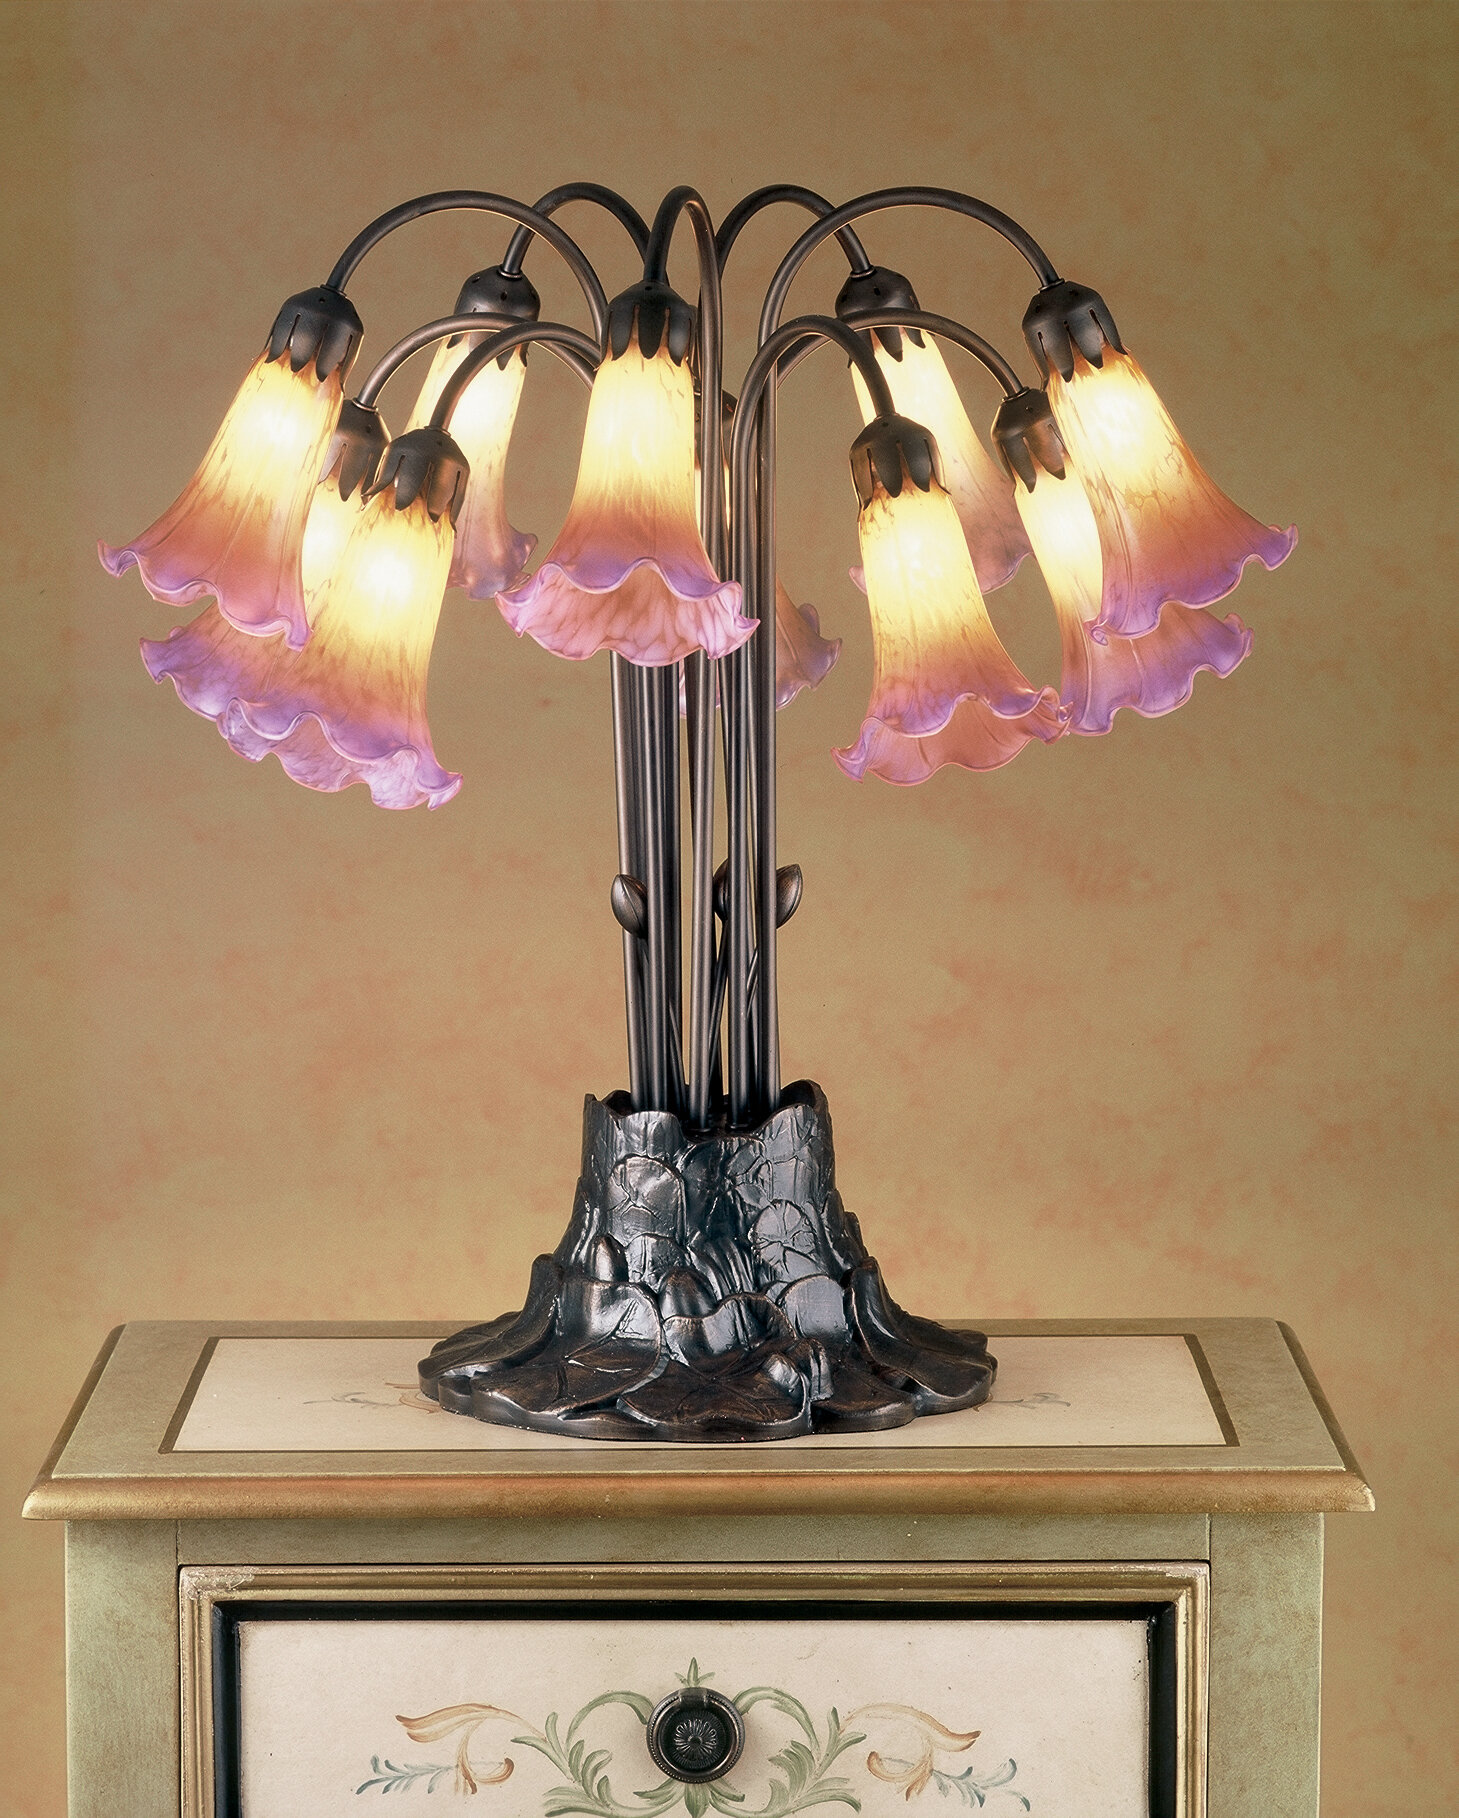 Bloomsbury Market Lily Flowers Tiffany Style Glass Accent Table